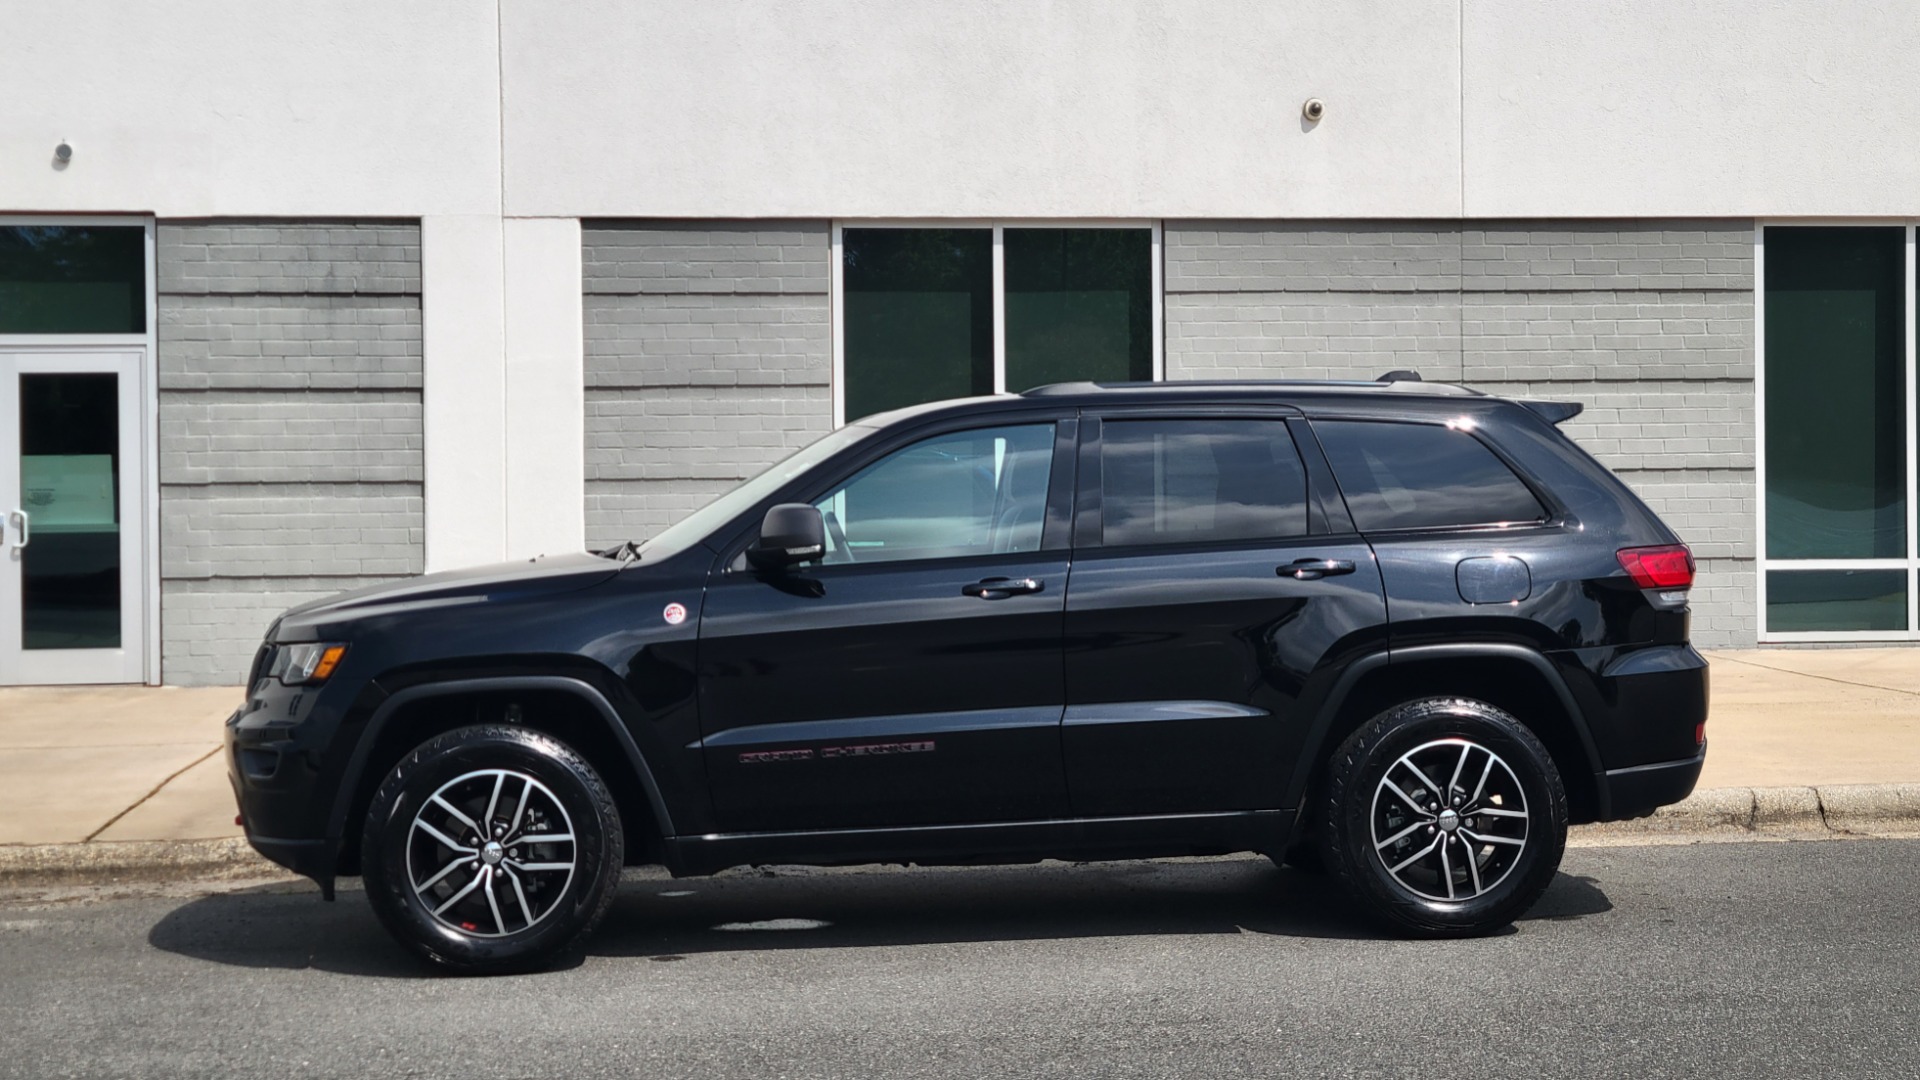 Used 2018 Jeep GRAND CHEROKEE TRAILHAWK 4X4 / 3.6L / NAV / BLIND SPOT / REARVIEW for sale $38,000 at Formula Imports in Charlotte NC 28227 4